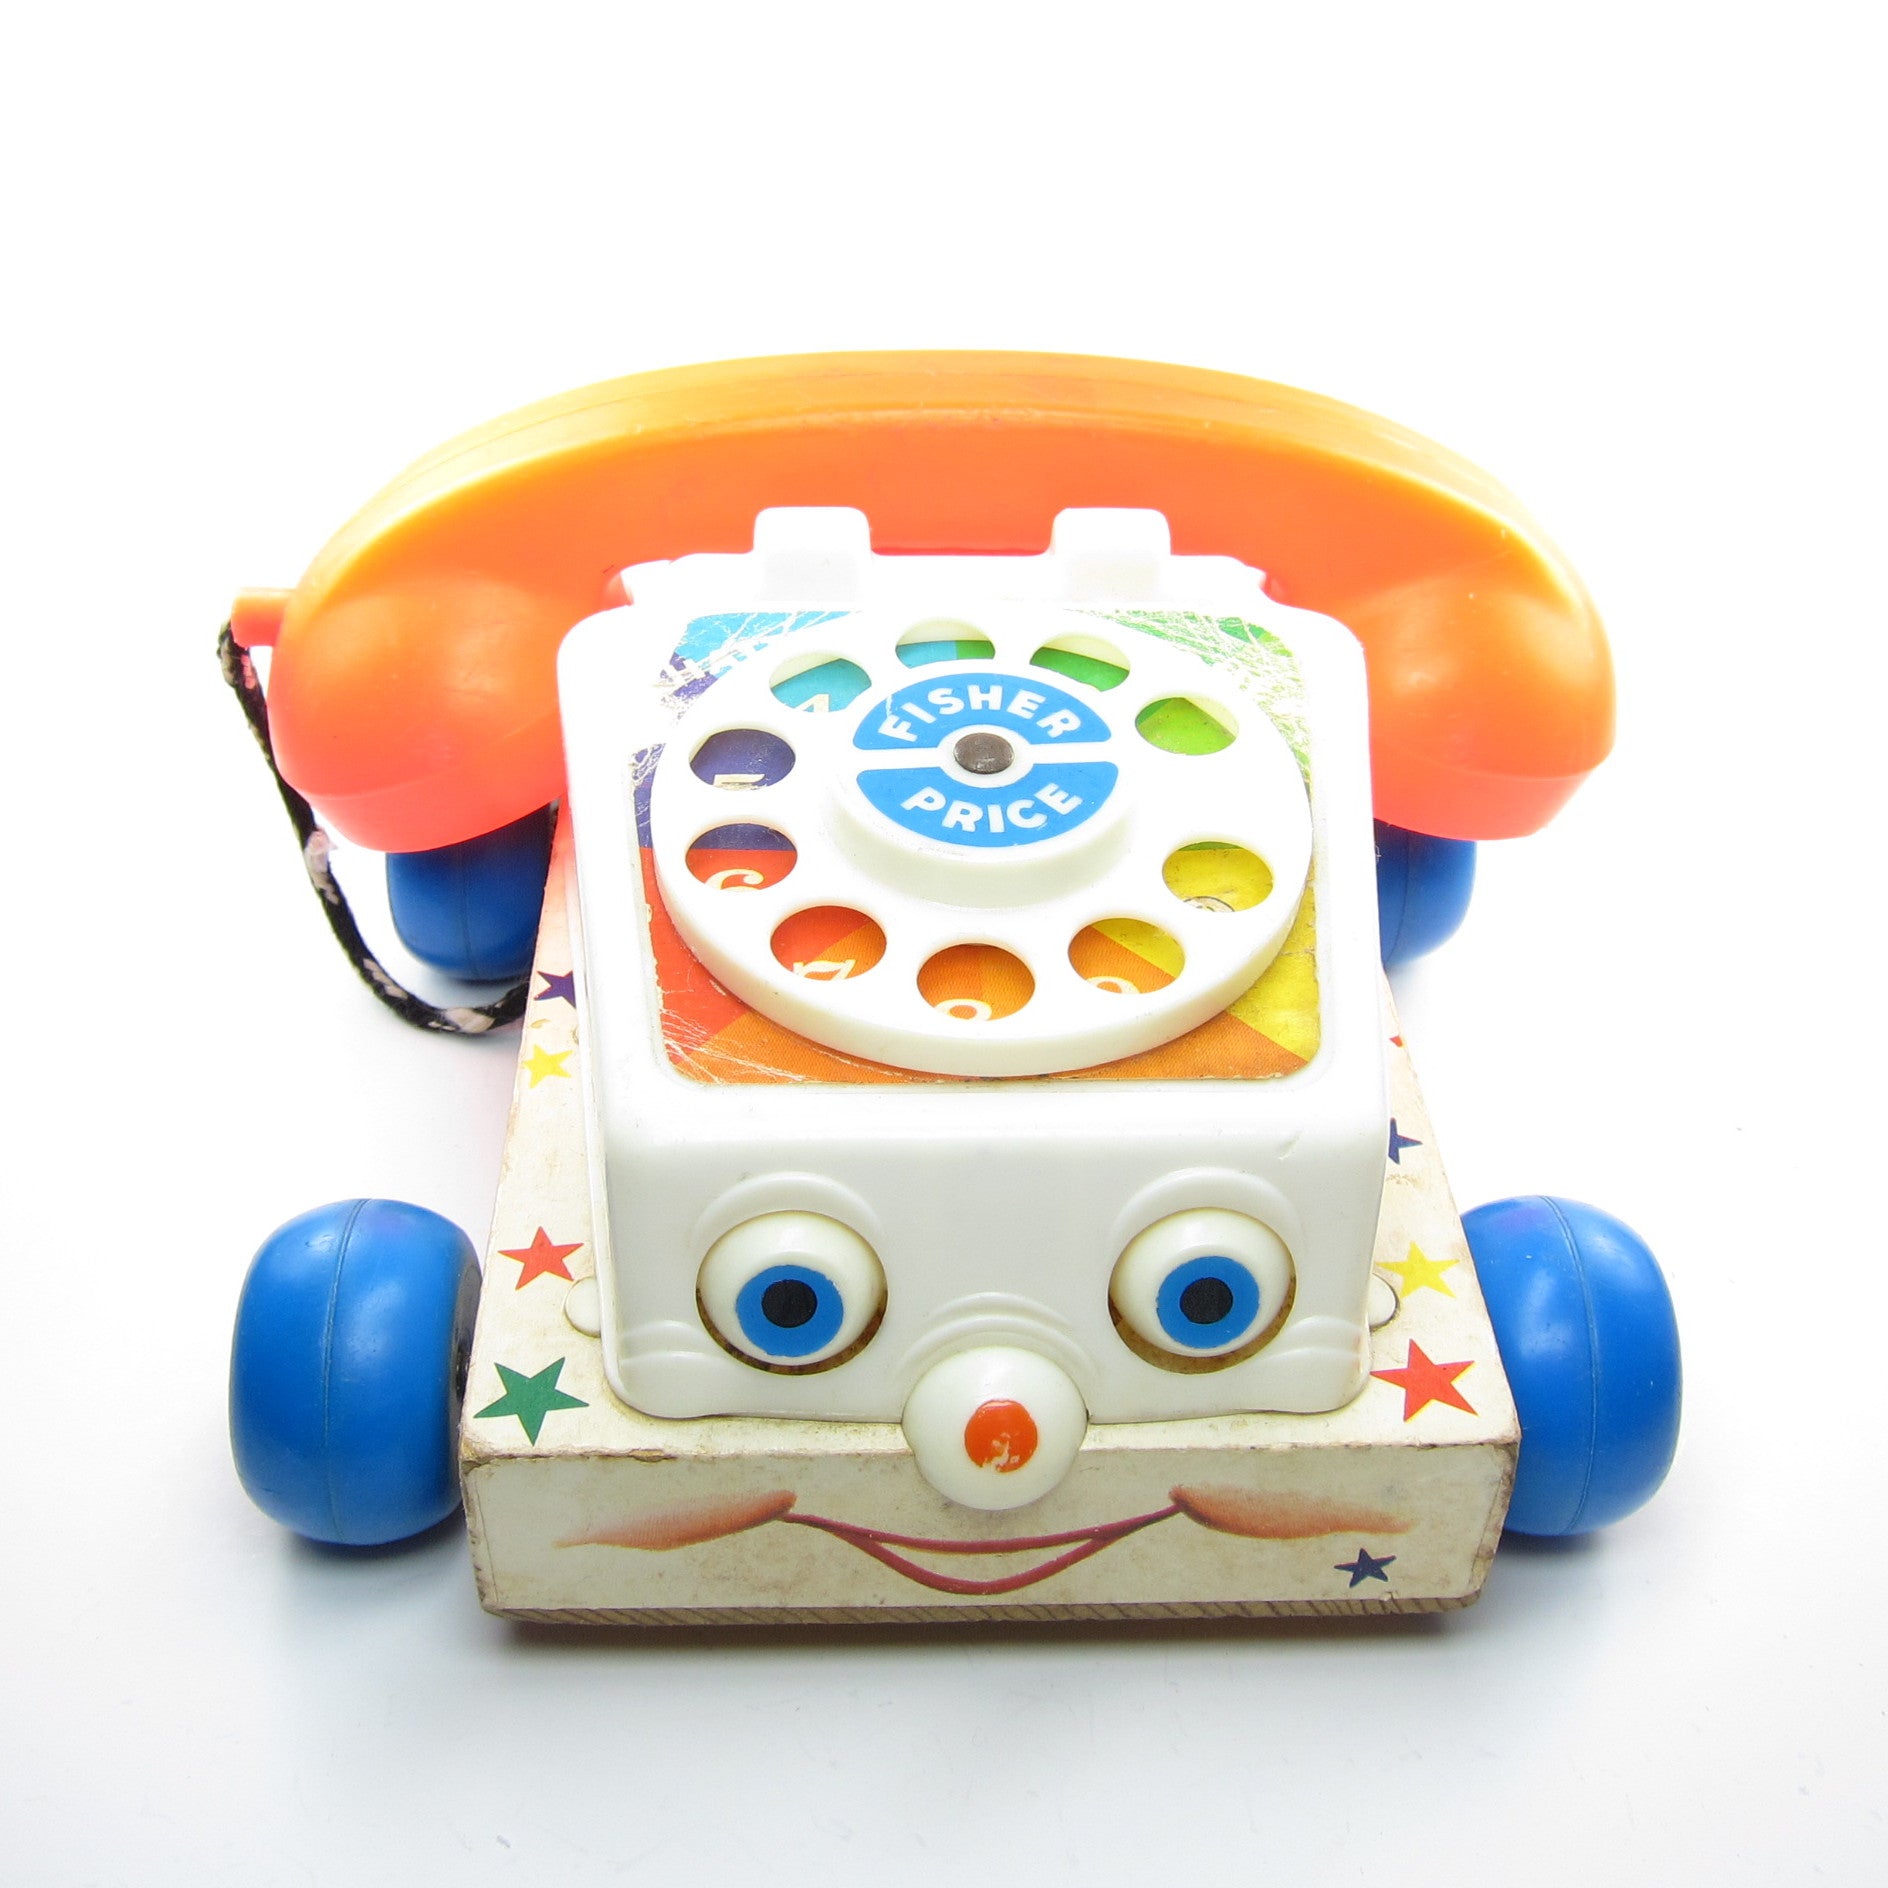 jouet-vintage-telephone-a-tirer-fisher-price-annee-1961-made-in-belgium